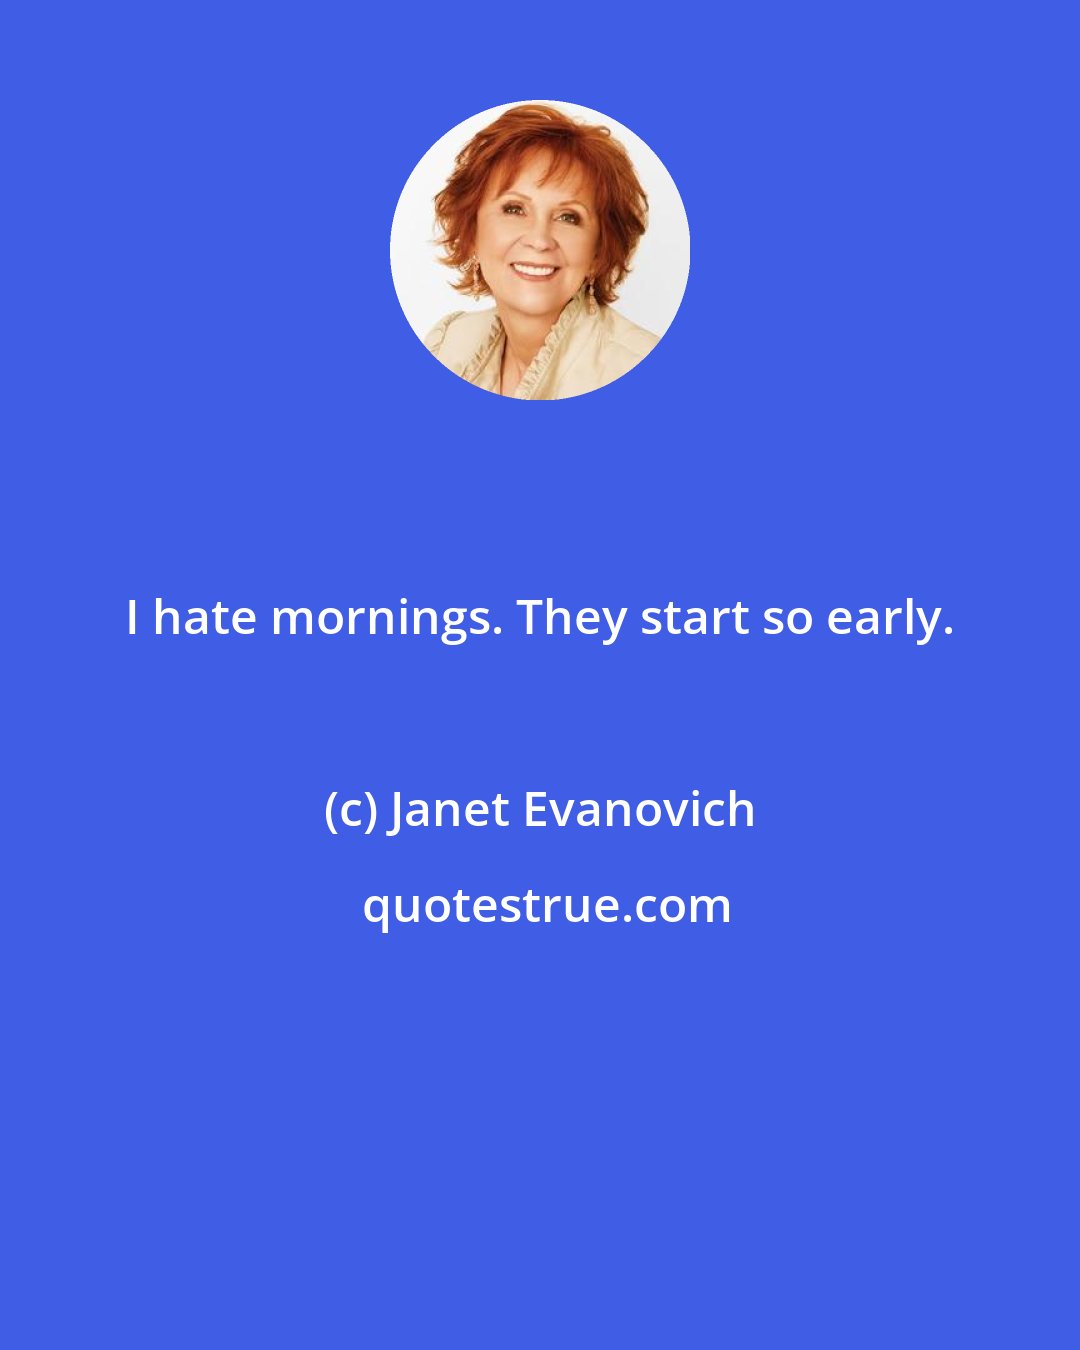 Janet Evanovich: I hate mornings. They start so early.